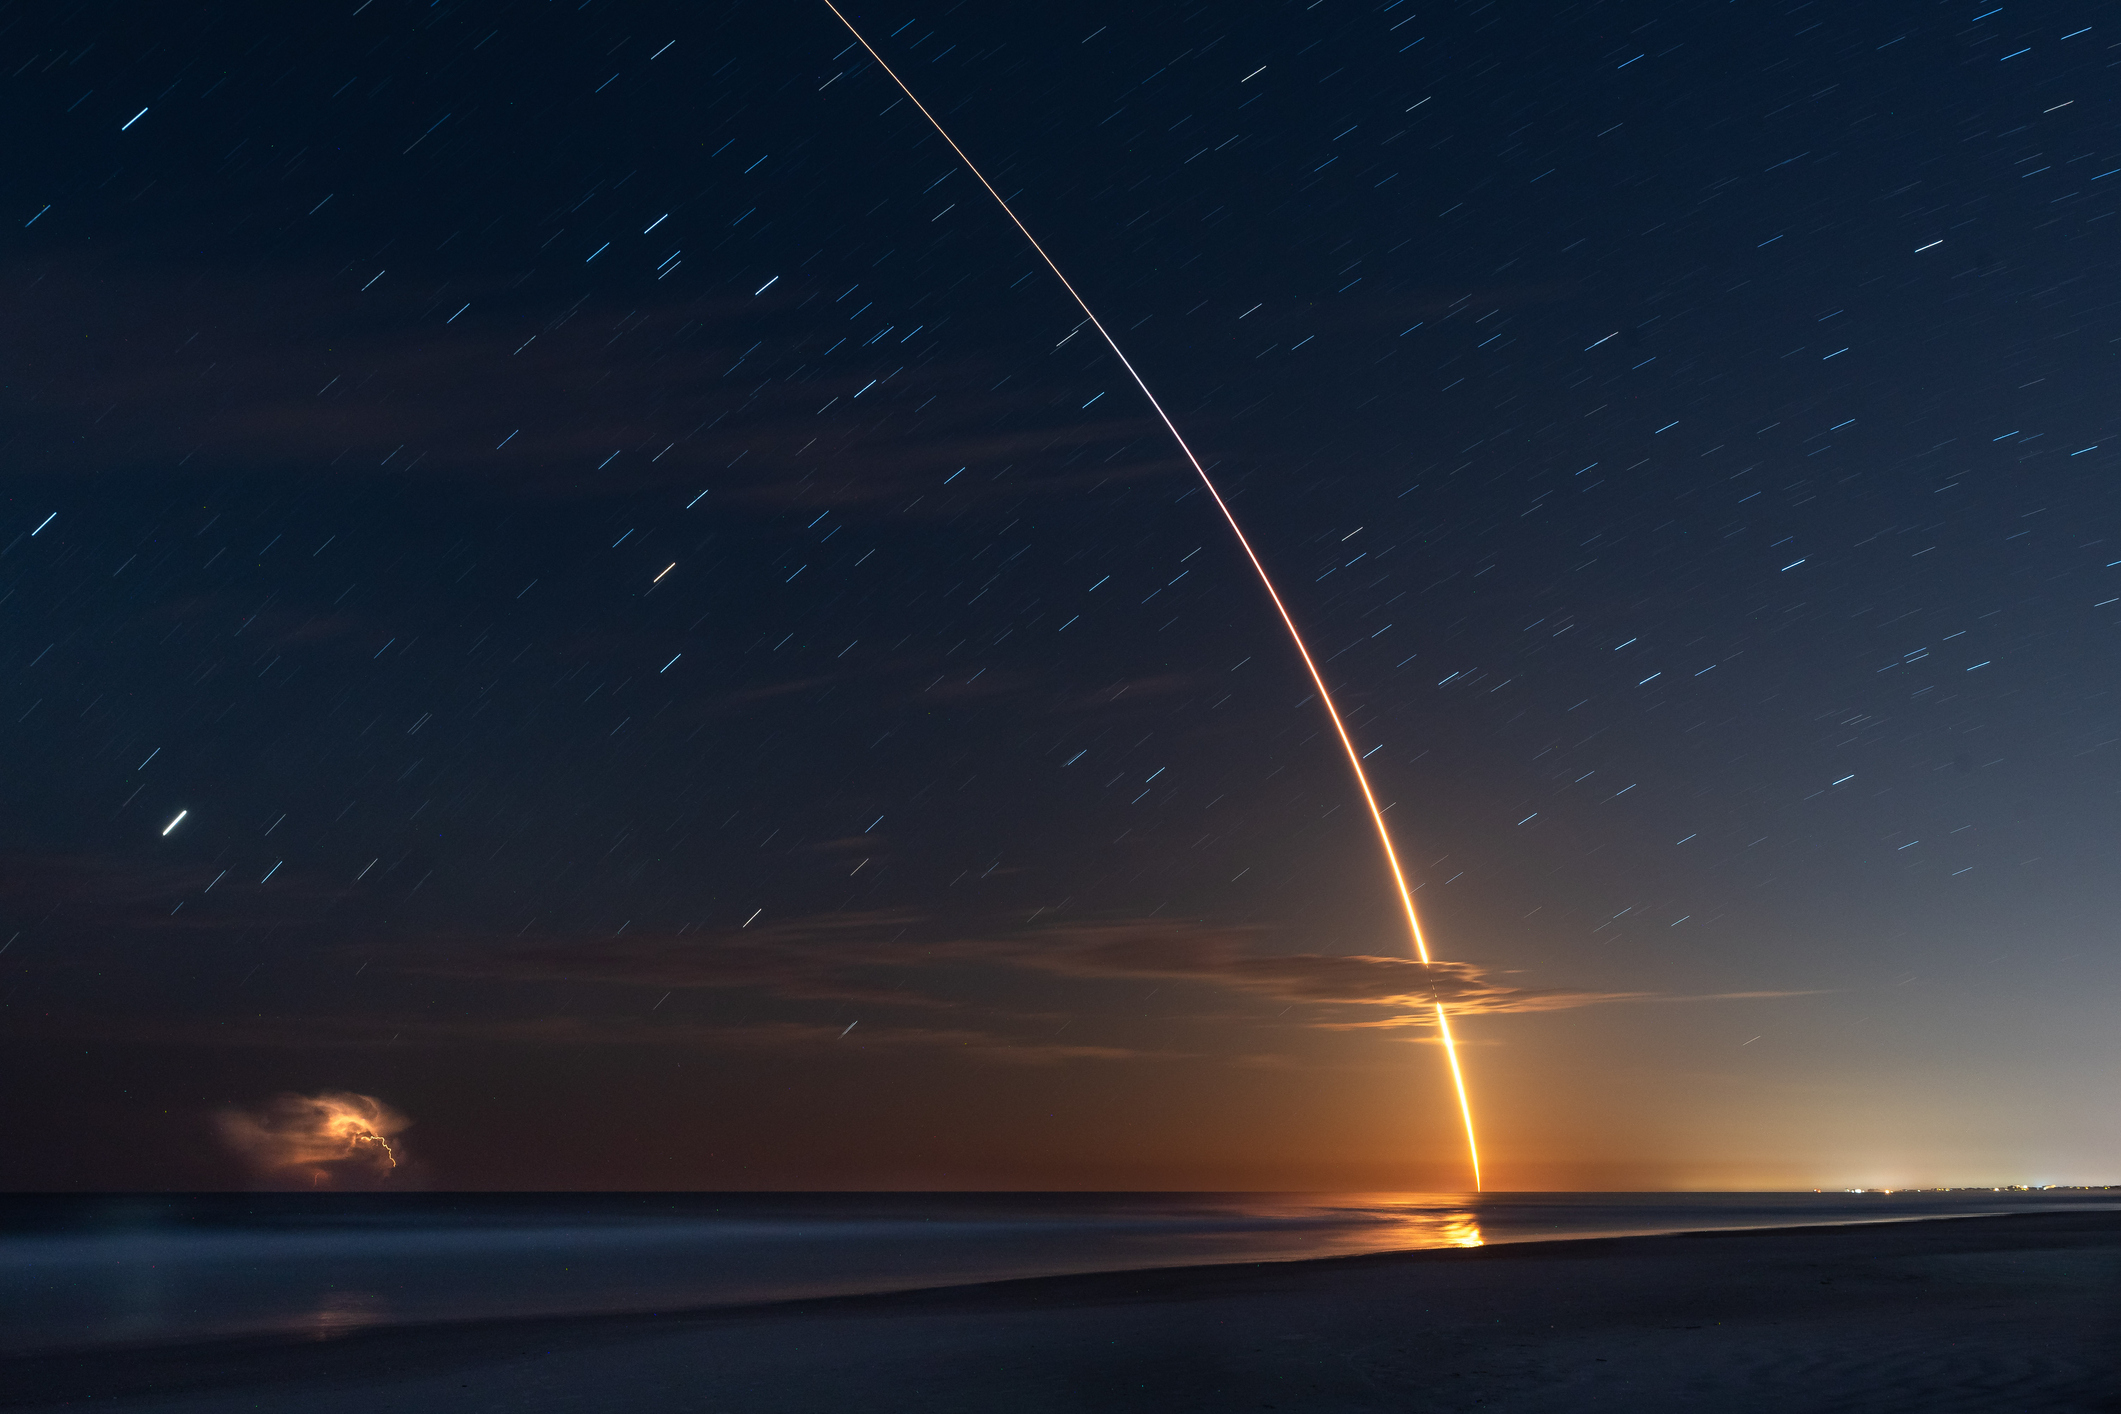 SpaceX Falcon 9 rocket launch light trail in sky at night, St Augustine Beach, Florida, USA